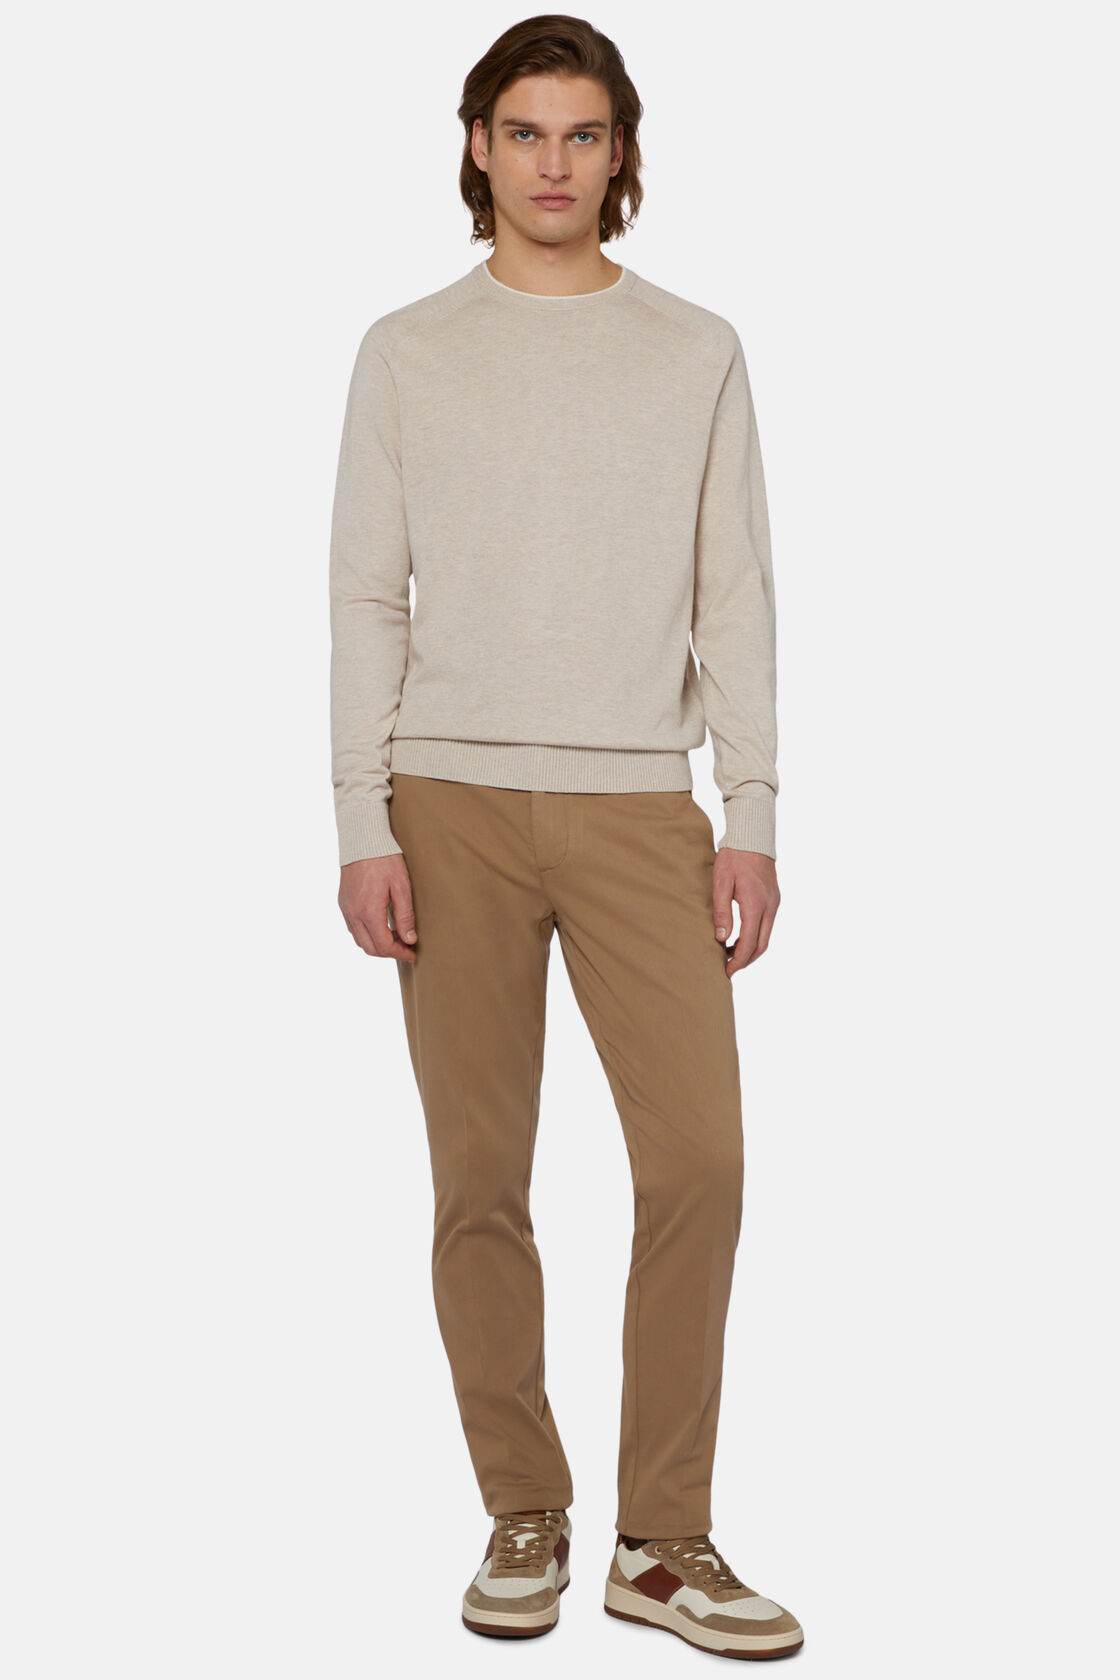 Sand Crew Neck Jumper in Cotton, Silk and Cashmere, Sand, hi-res